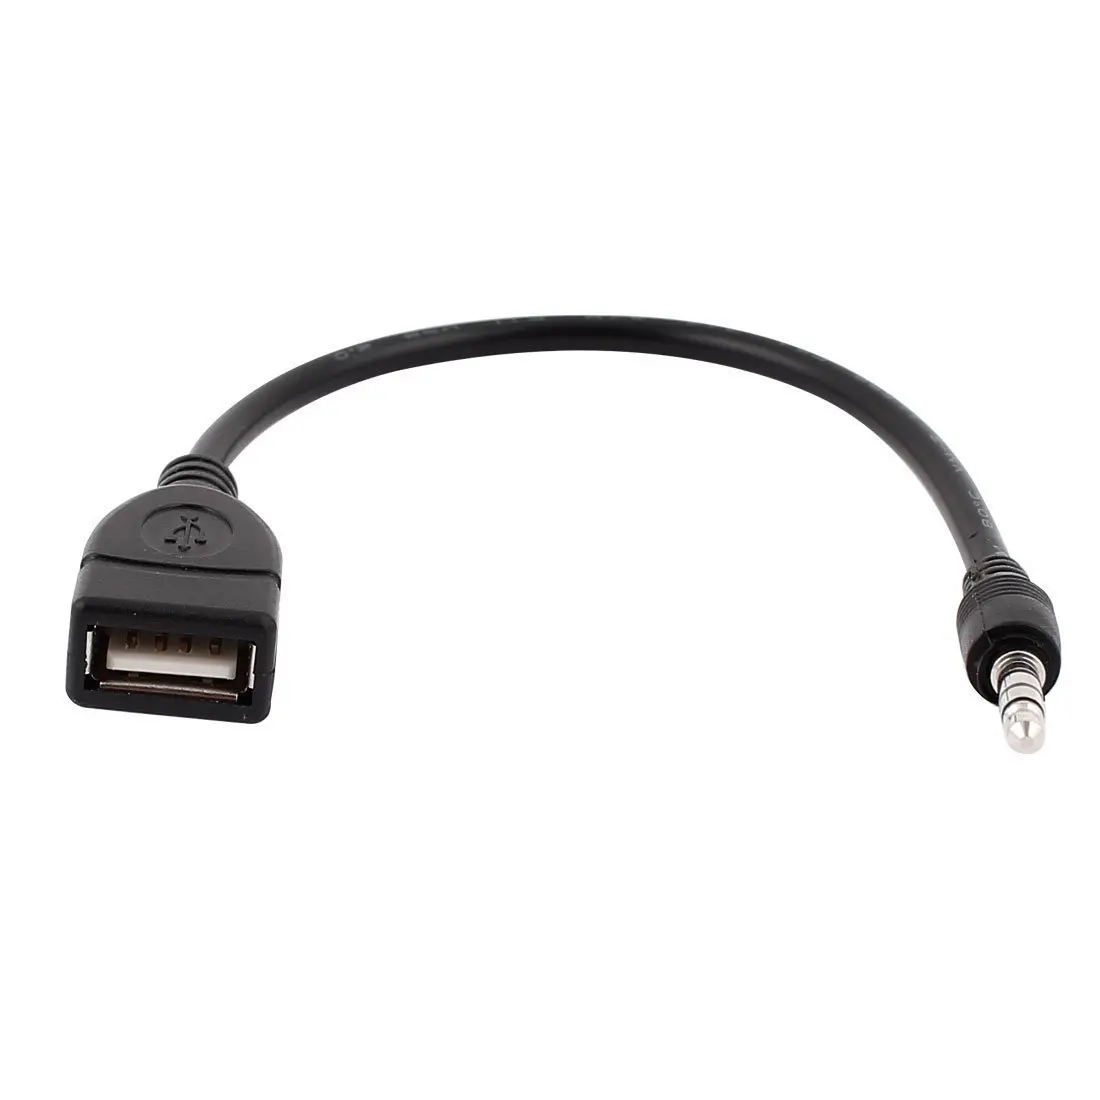 Male AUX Audio Plug Jack to 2.0 Converter Cable on m.alibaba.com